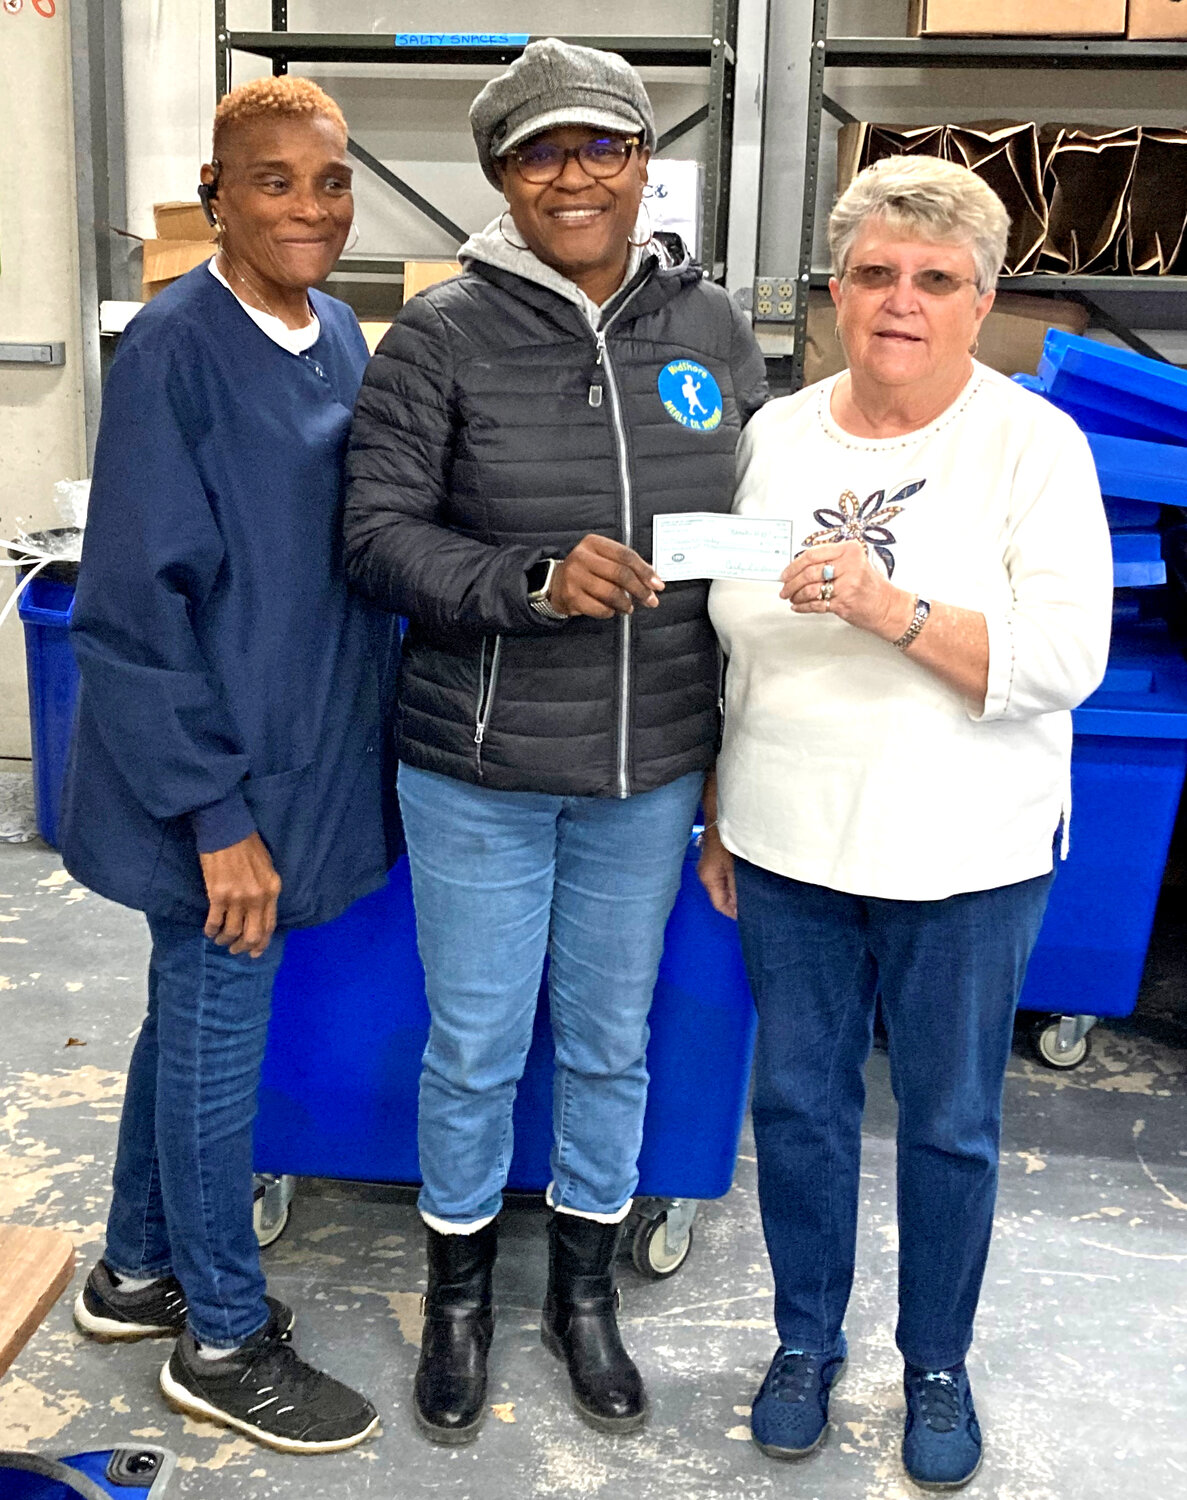 On Nov. 28, Giving Tuesday, Cambridge Lions Club members made a donation to Meals til Monday, a group that provides food to students and their families. From the left are Joyce Green, Pam Allen of Meals til Monday and Treasurer of Cambridge Lions Club Carolyn Williams.